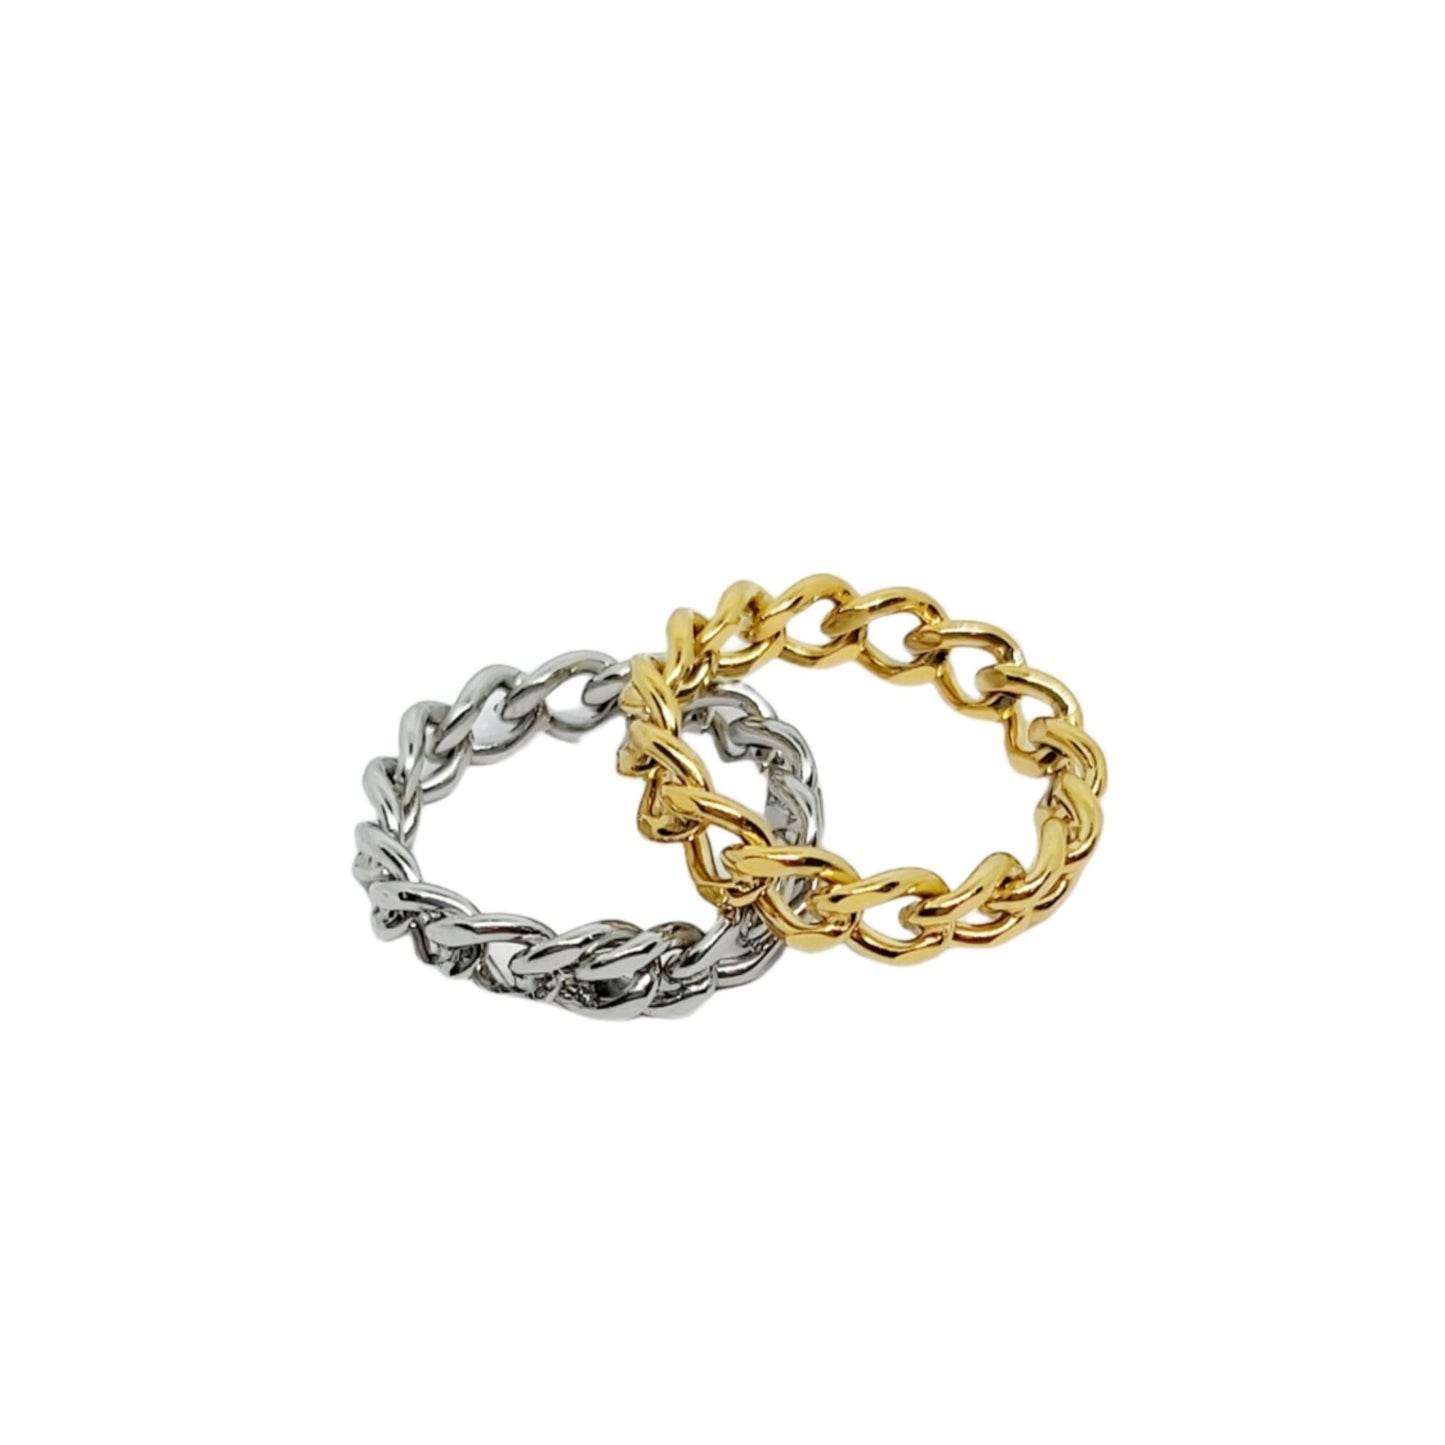 Rockstar Gold Plated Curb Chain Ring